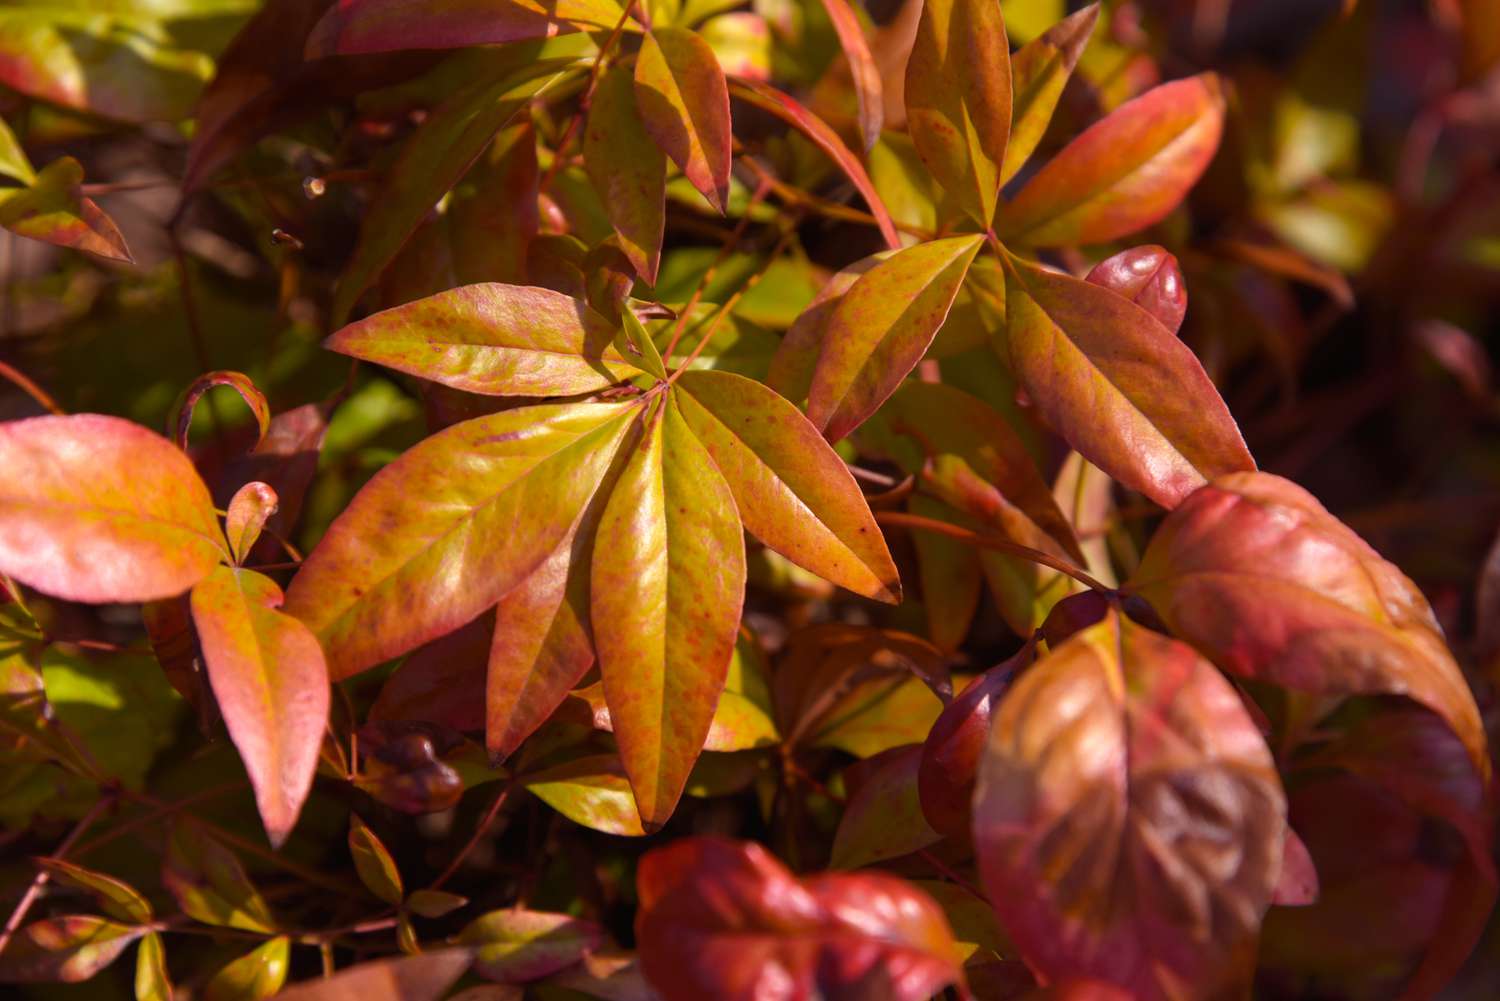 Firepower nandina plant with red and yellow leaves closeup